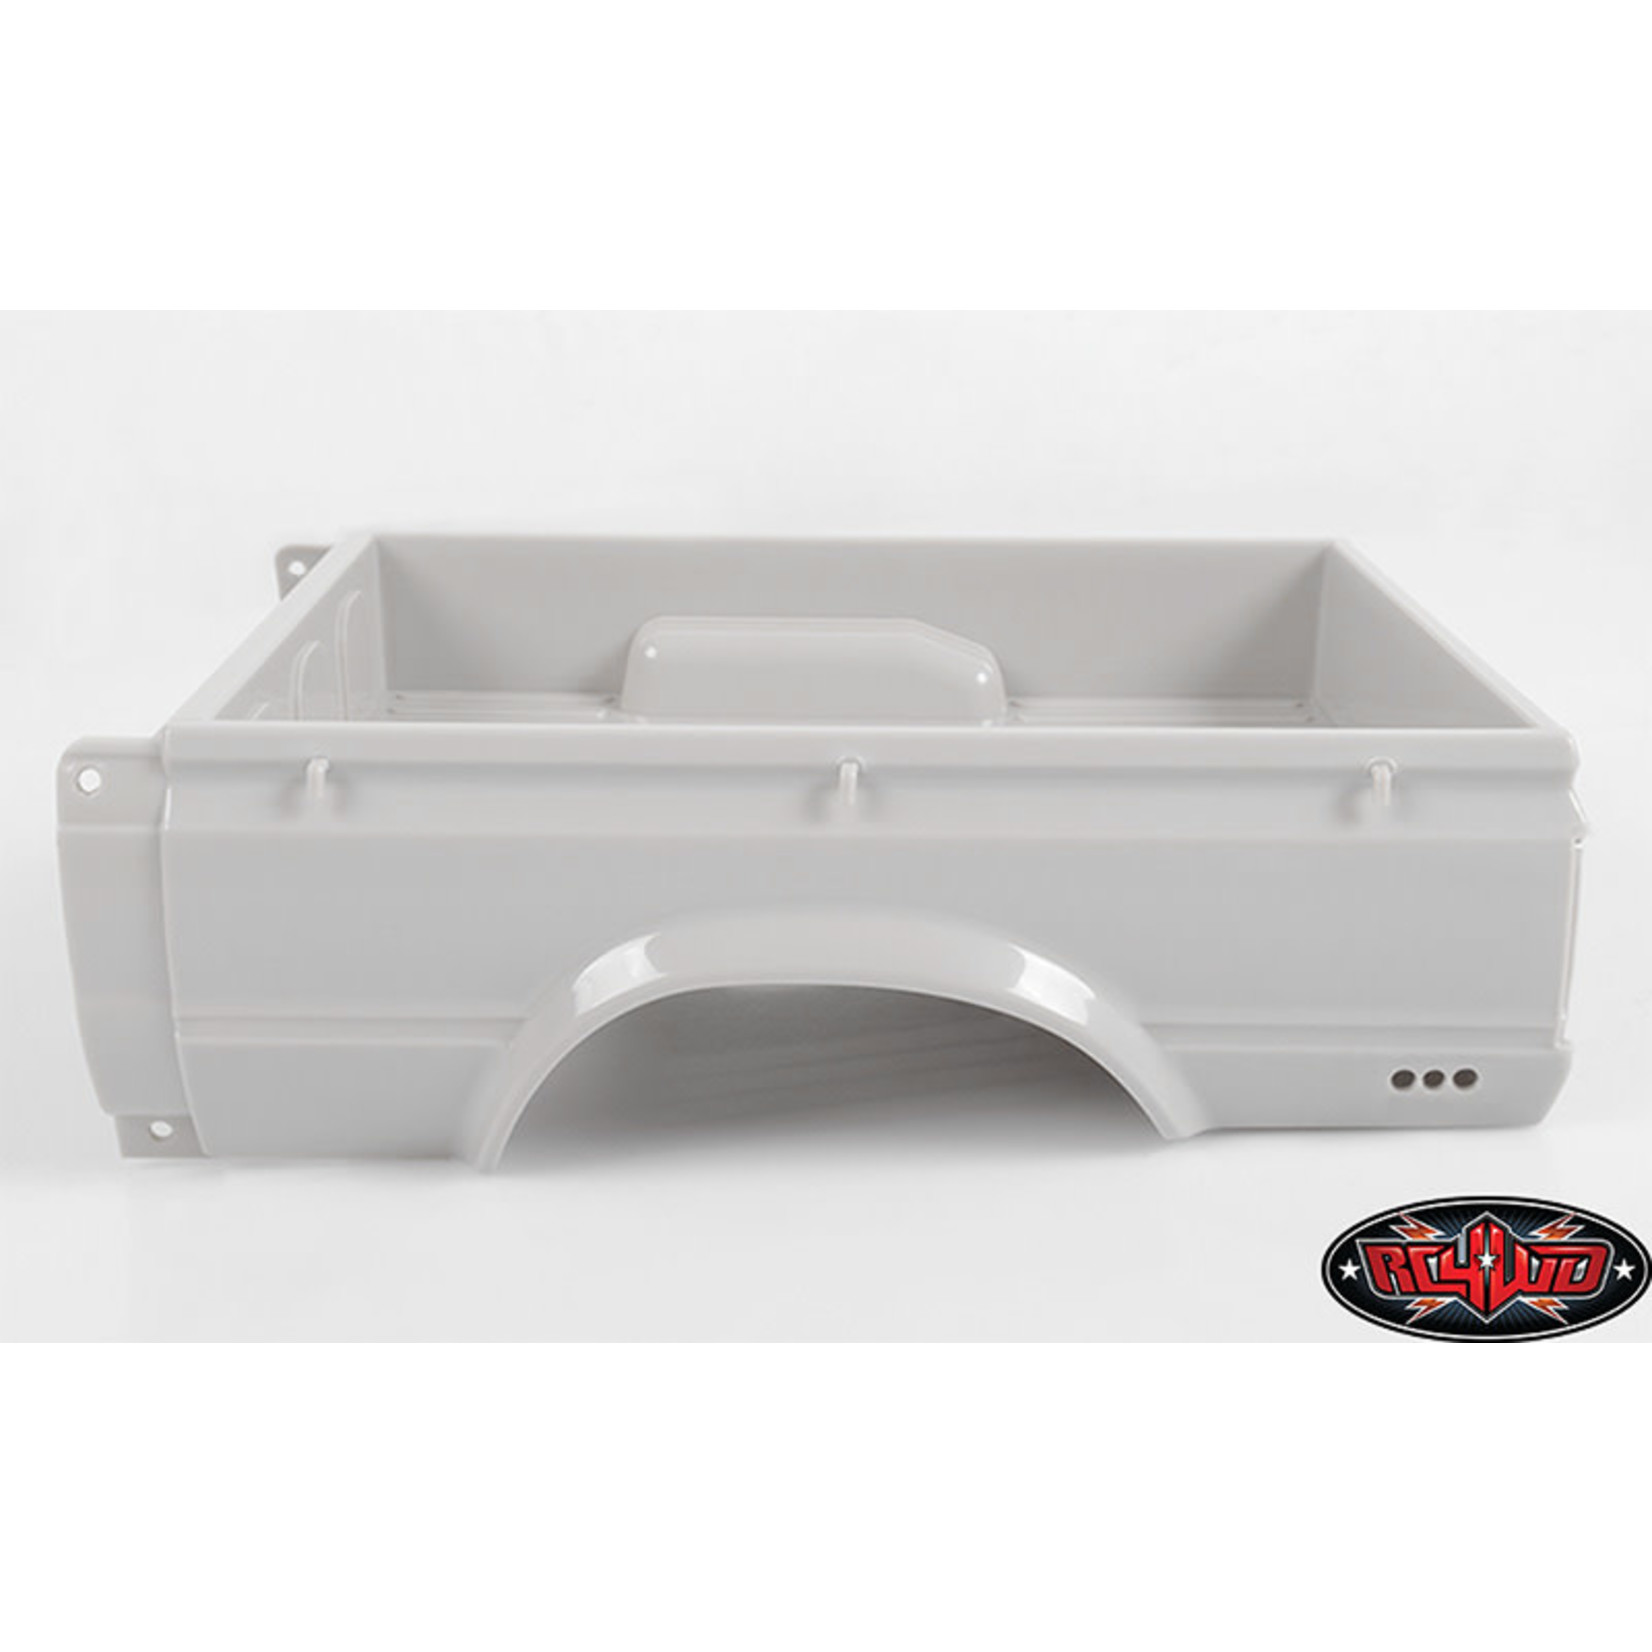 RC4WD RC4WD Mojave II Rear Bed, Primer Gray: TF2 #Z-B0072